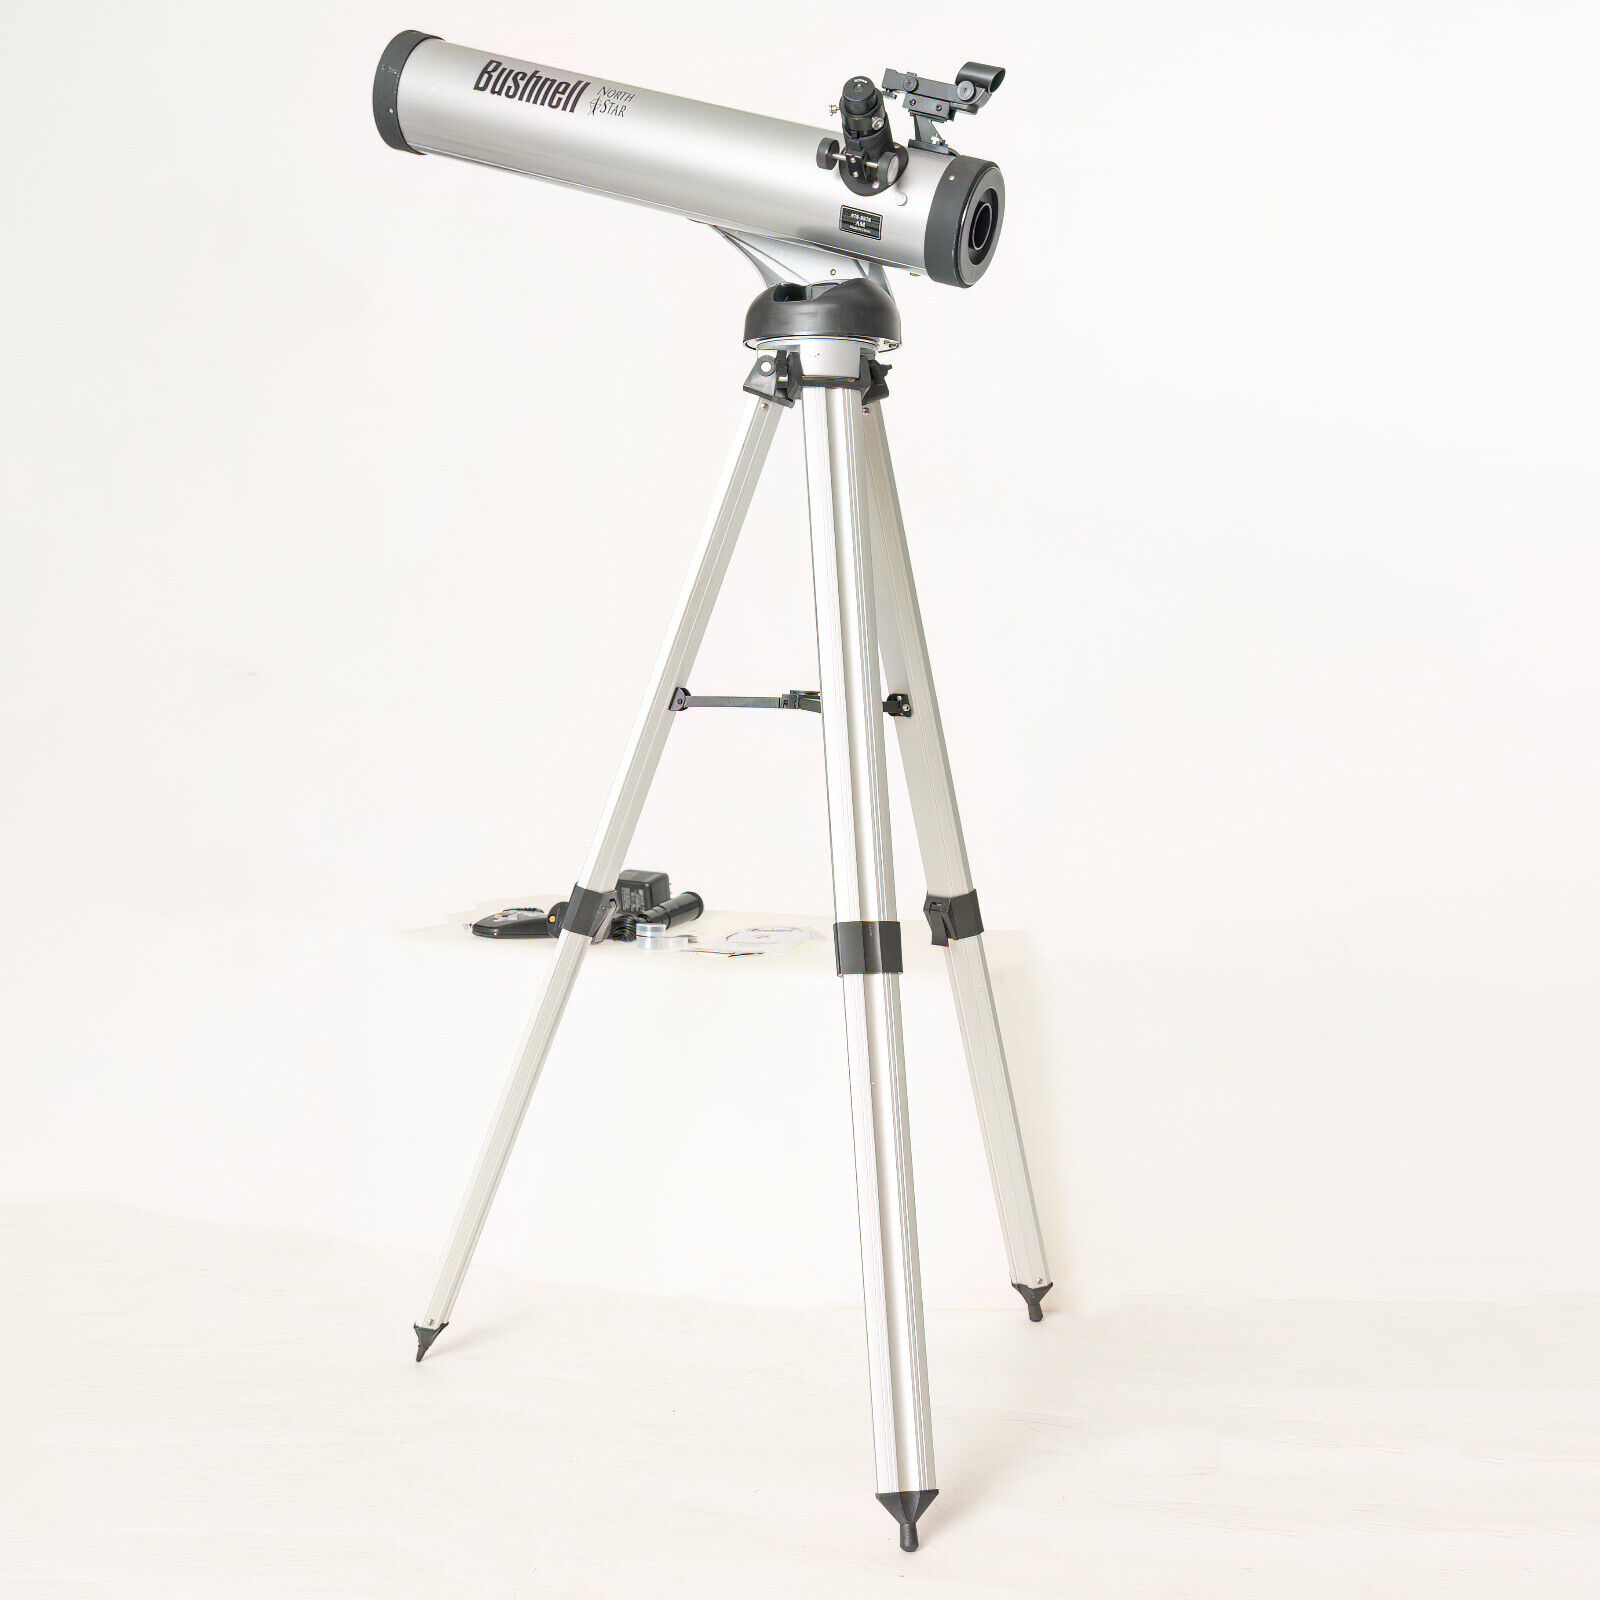 Bushnell Northstar Motorized Telescope with Wired Control and Video Record Adapt